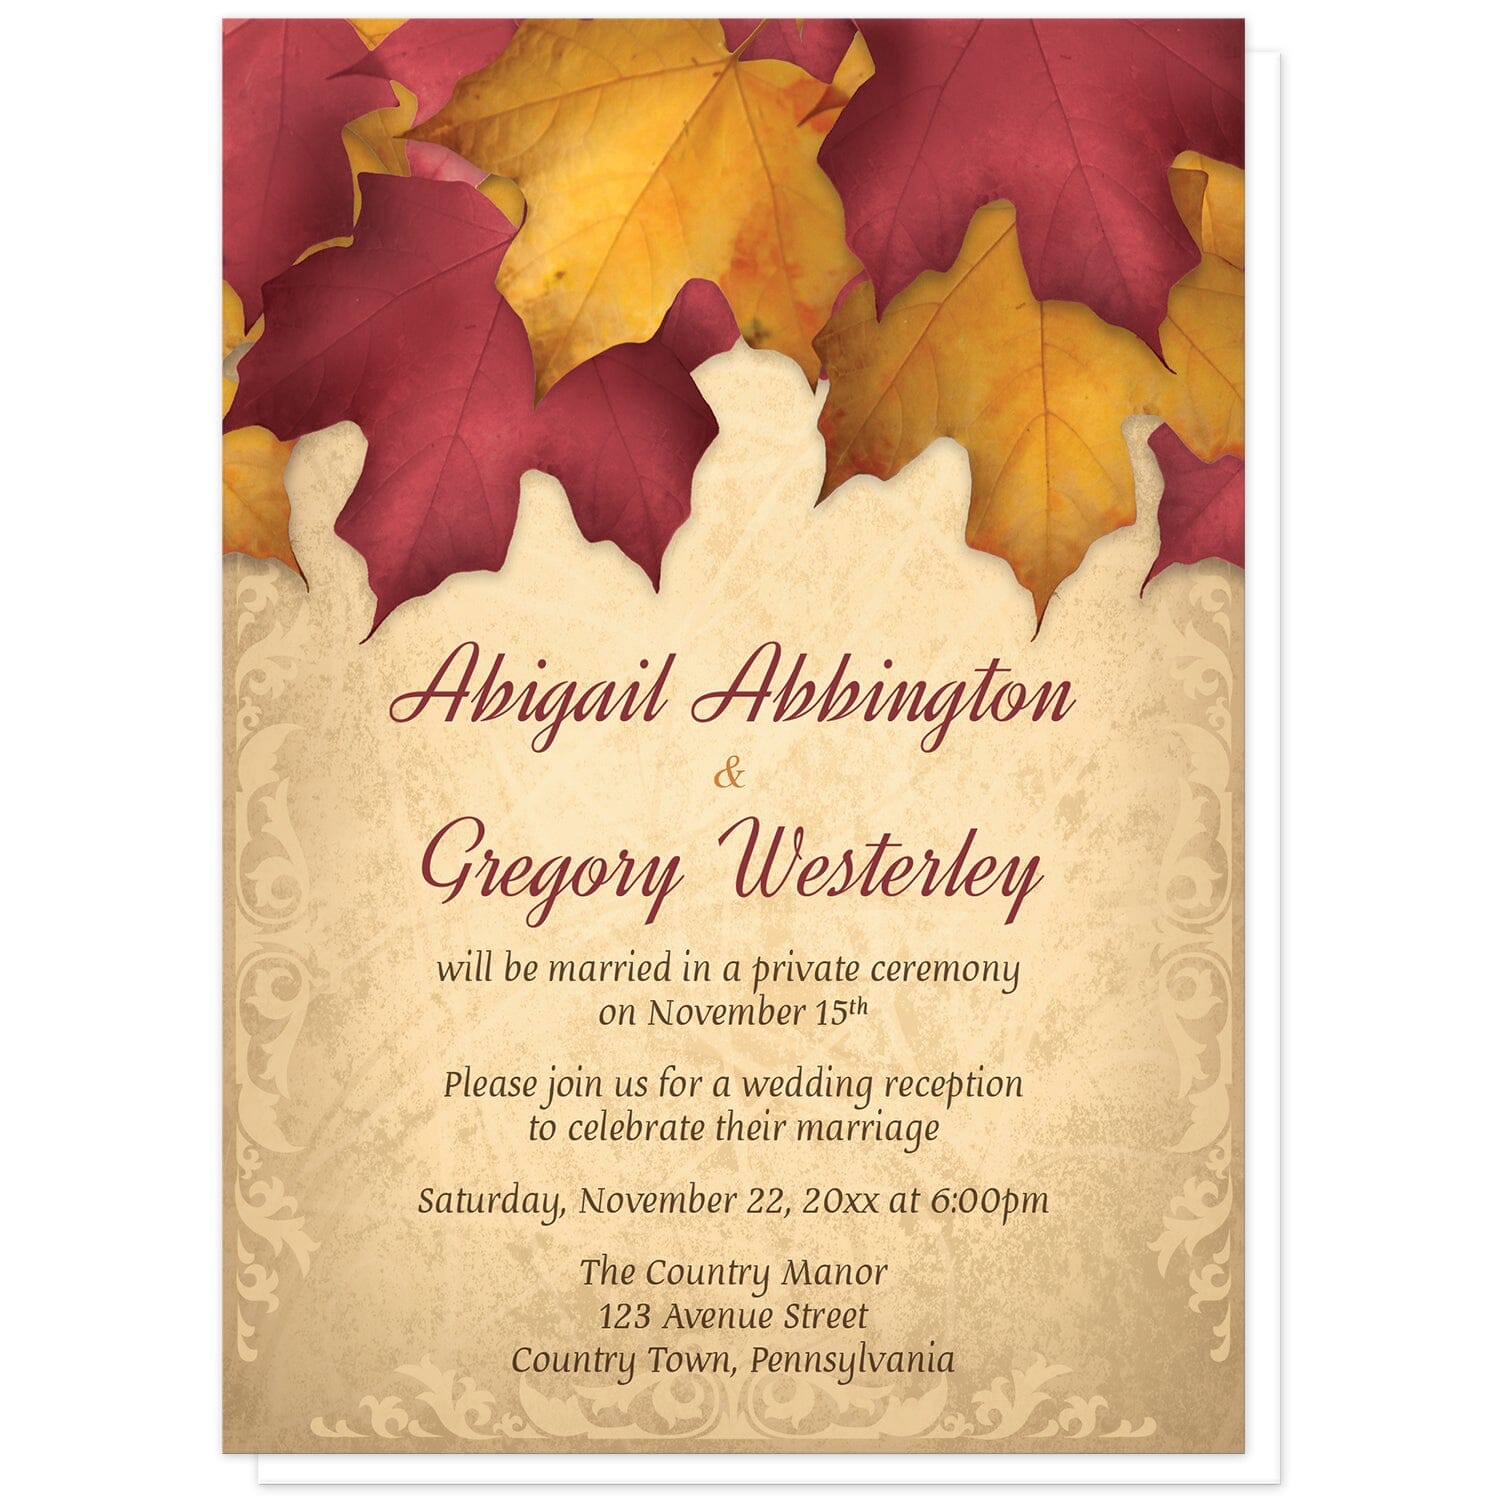 Rustic Burgundy Gold Autumn Reception Only Invitations at Artistically Invited. Rustic burgundy gold autumn reception only invitations with an arrangement of burgundy and gold fall leaves along the top over a beautiful gold colored background with elegant flourishes along the edges. Your personalized post-wedding reception details are custom printed in burgundy and brown over the gold background.